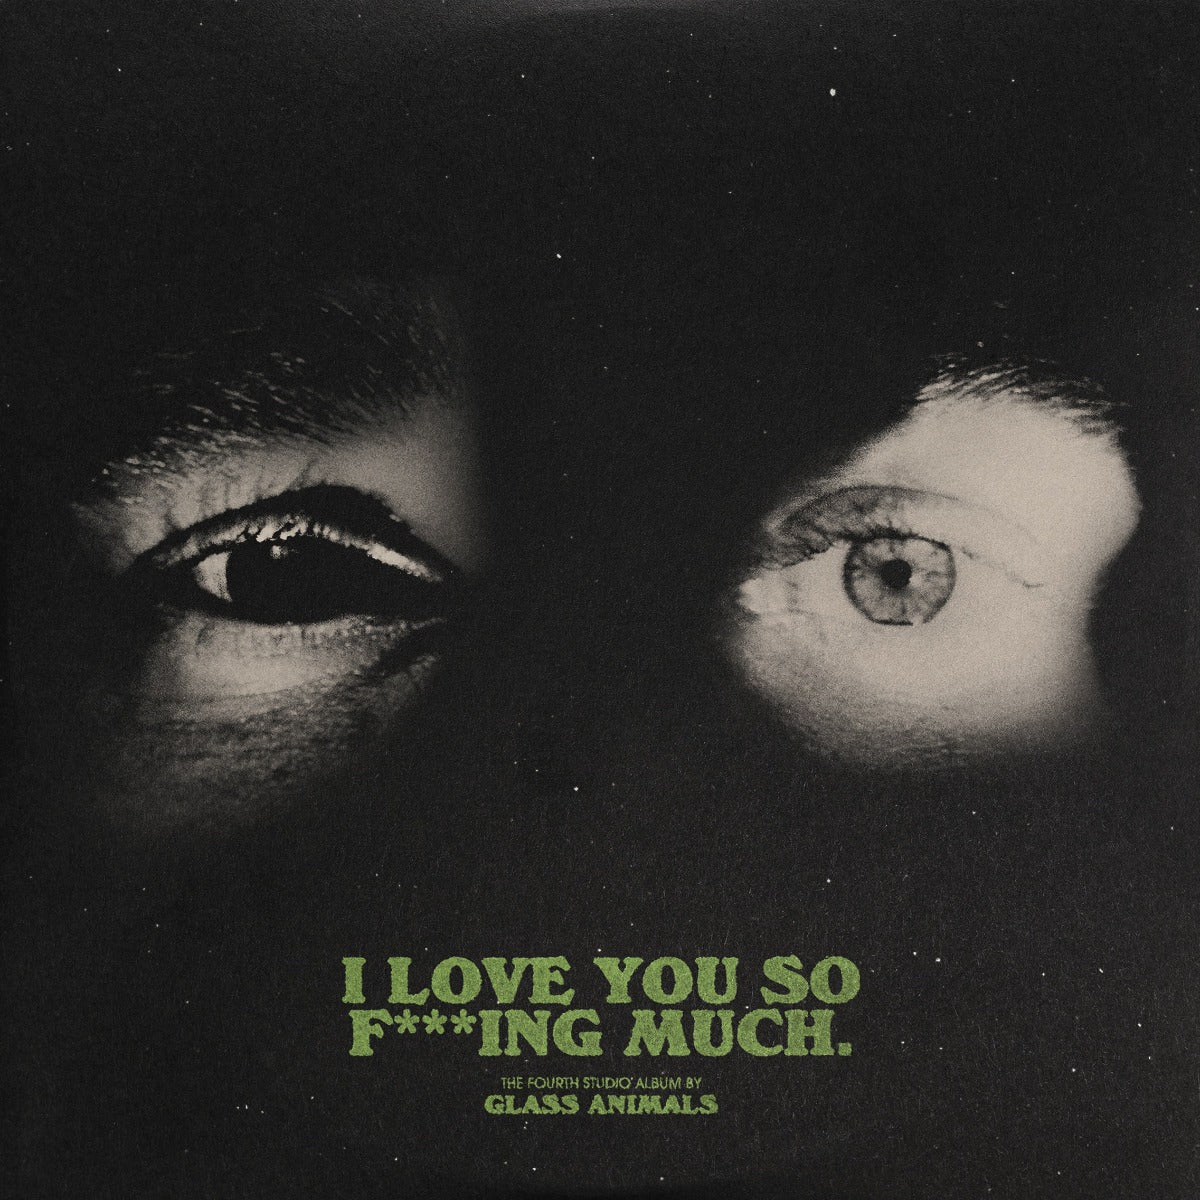 Glass Animals | I Love You So F***ing Much [Explicit Content] (Indie Exclusive, Limited Edition, Black/White Splatter Colored Vinyl) | Vinyl - 0